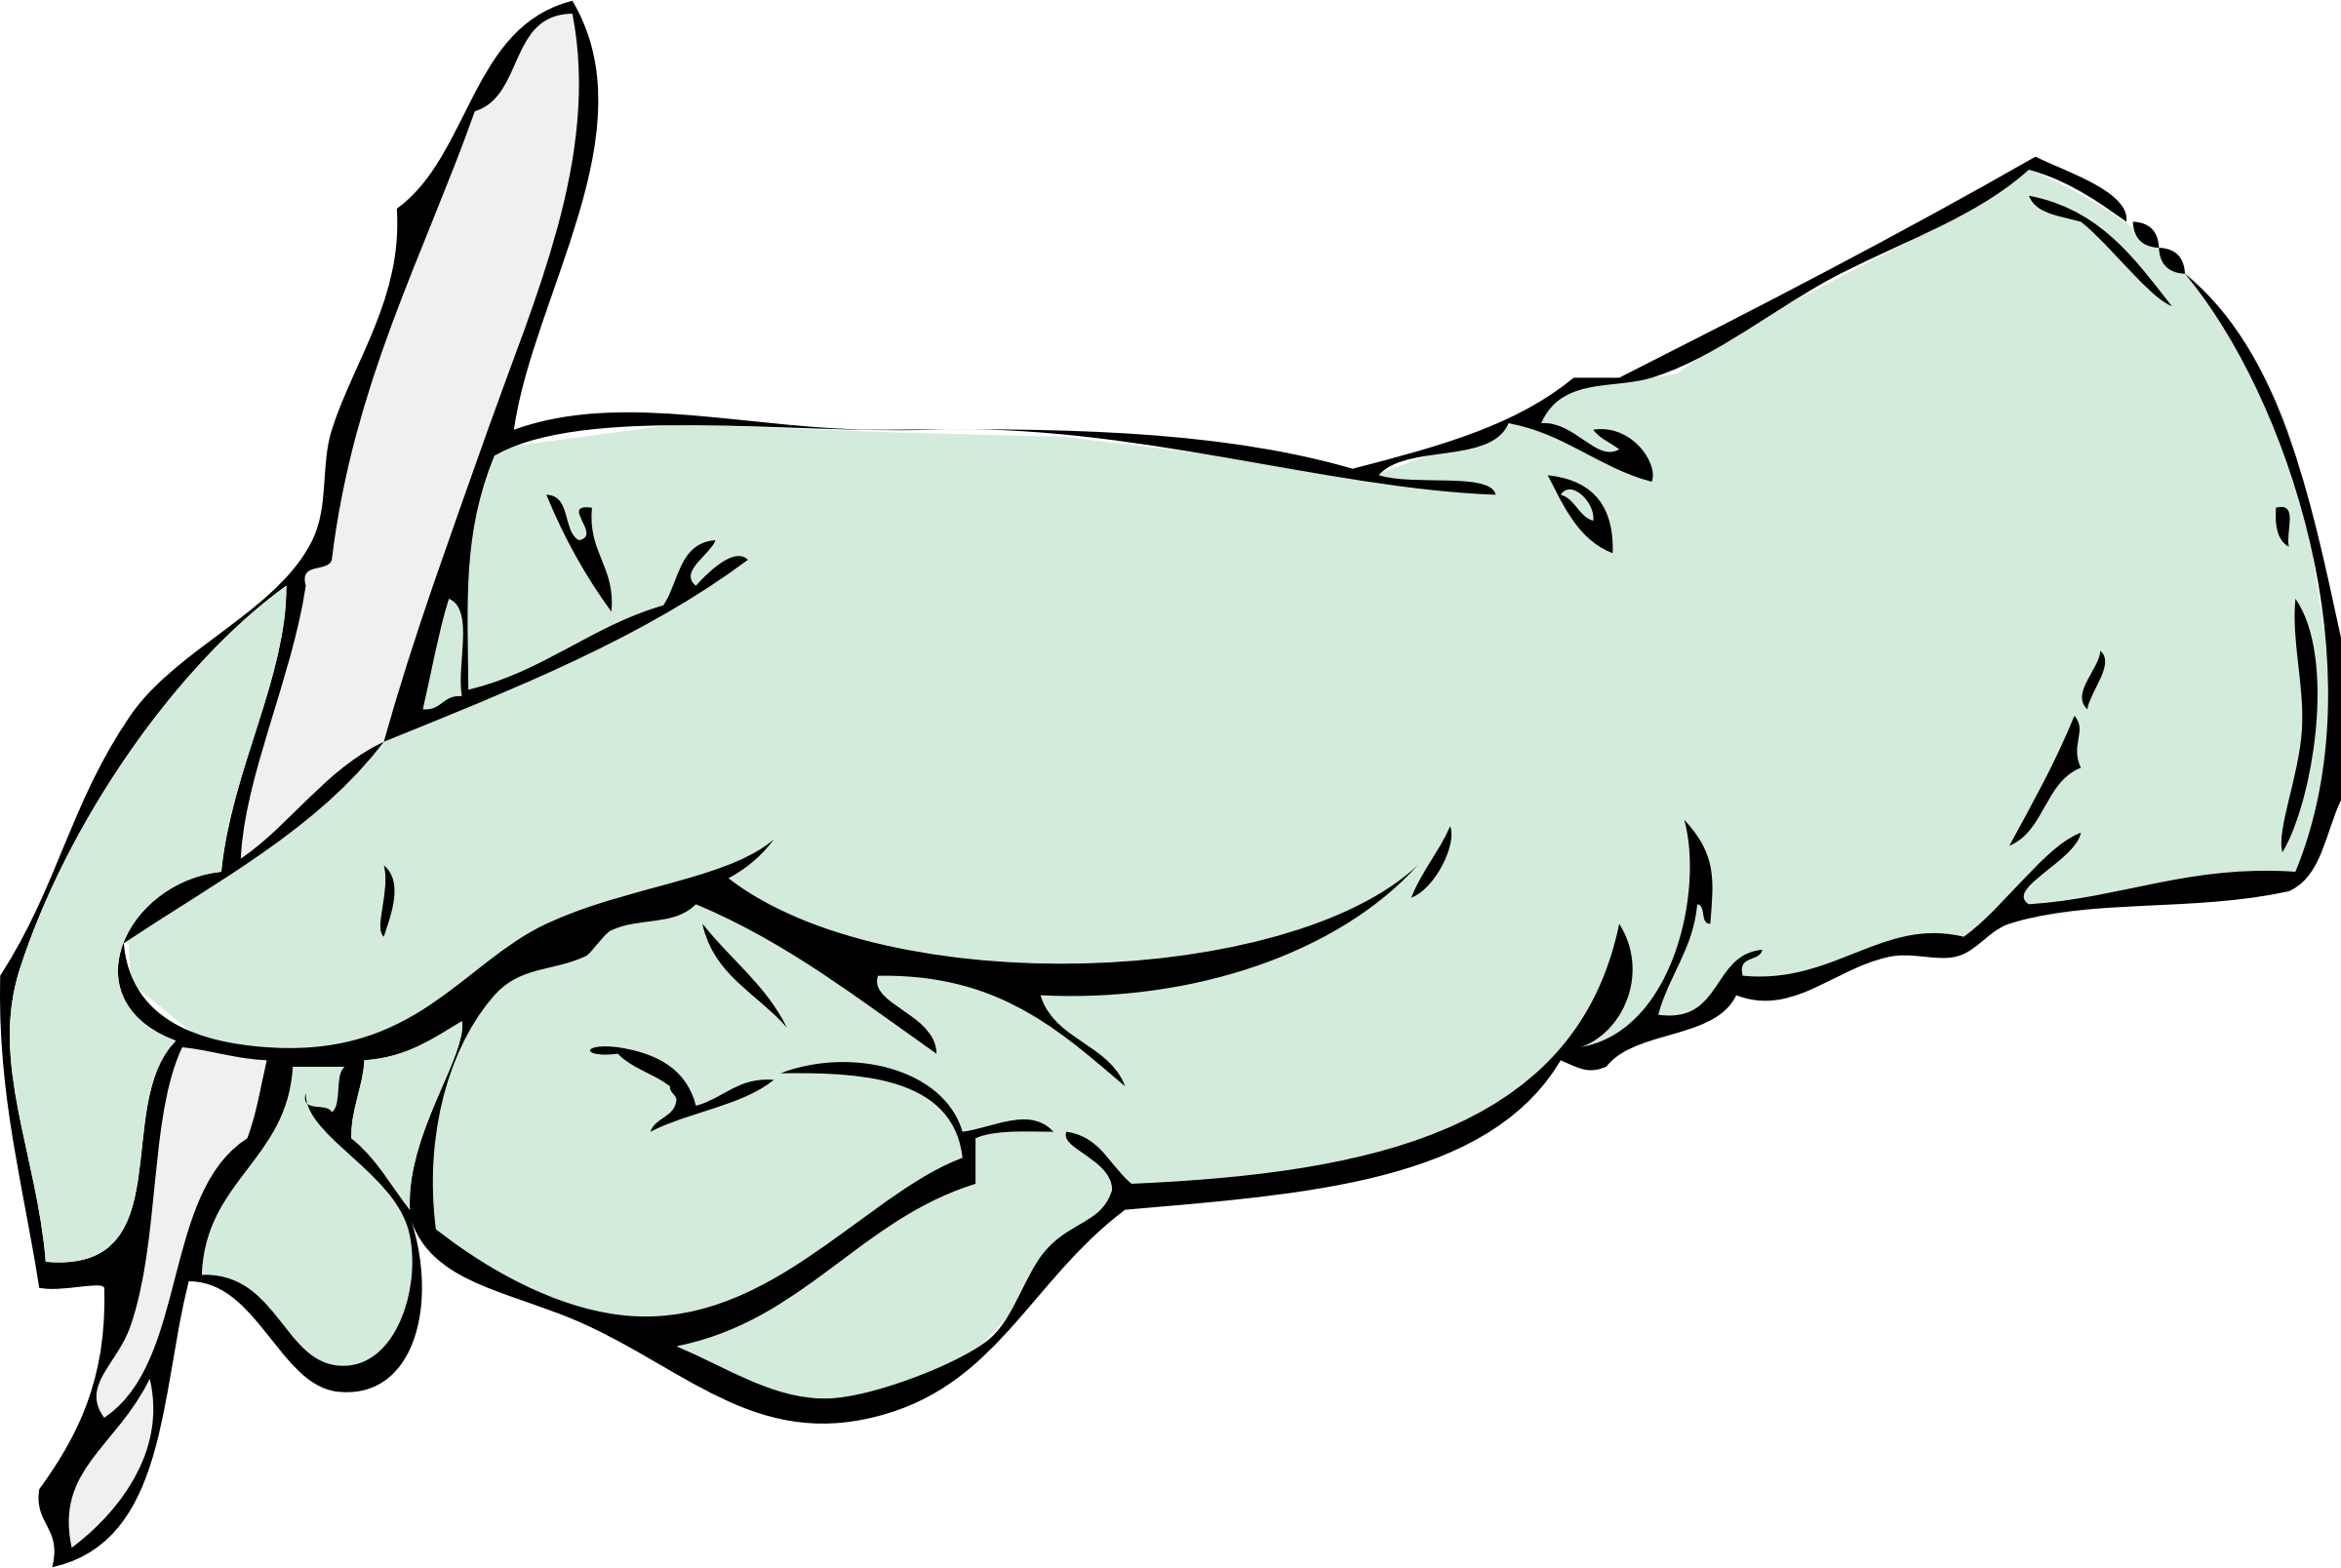 Knife clipart surgeon. Gloved hand with scalpel